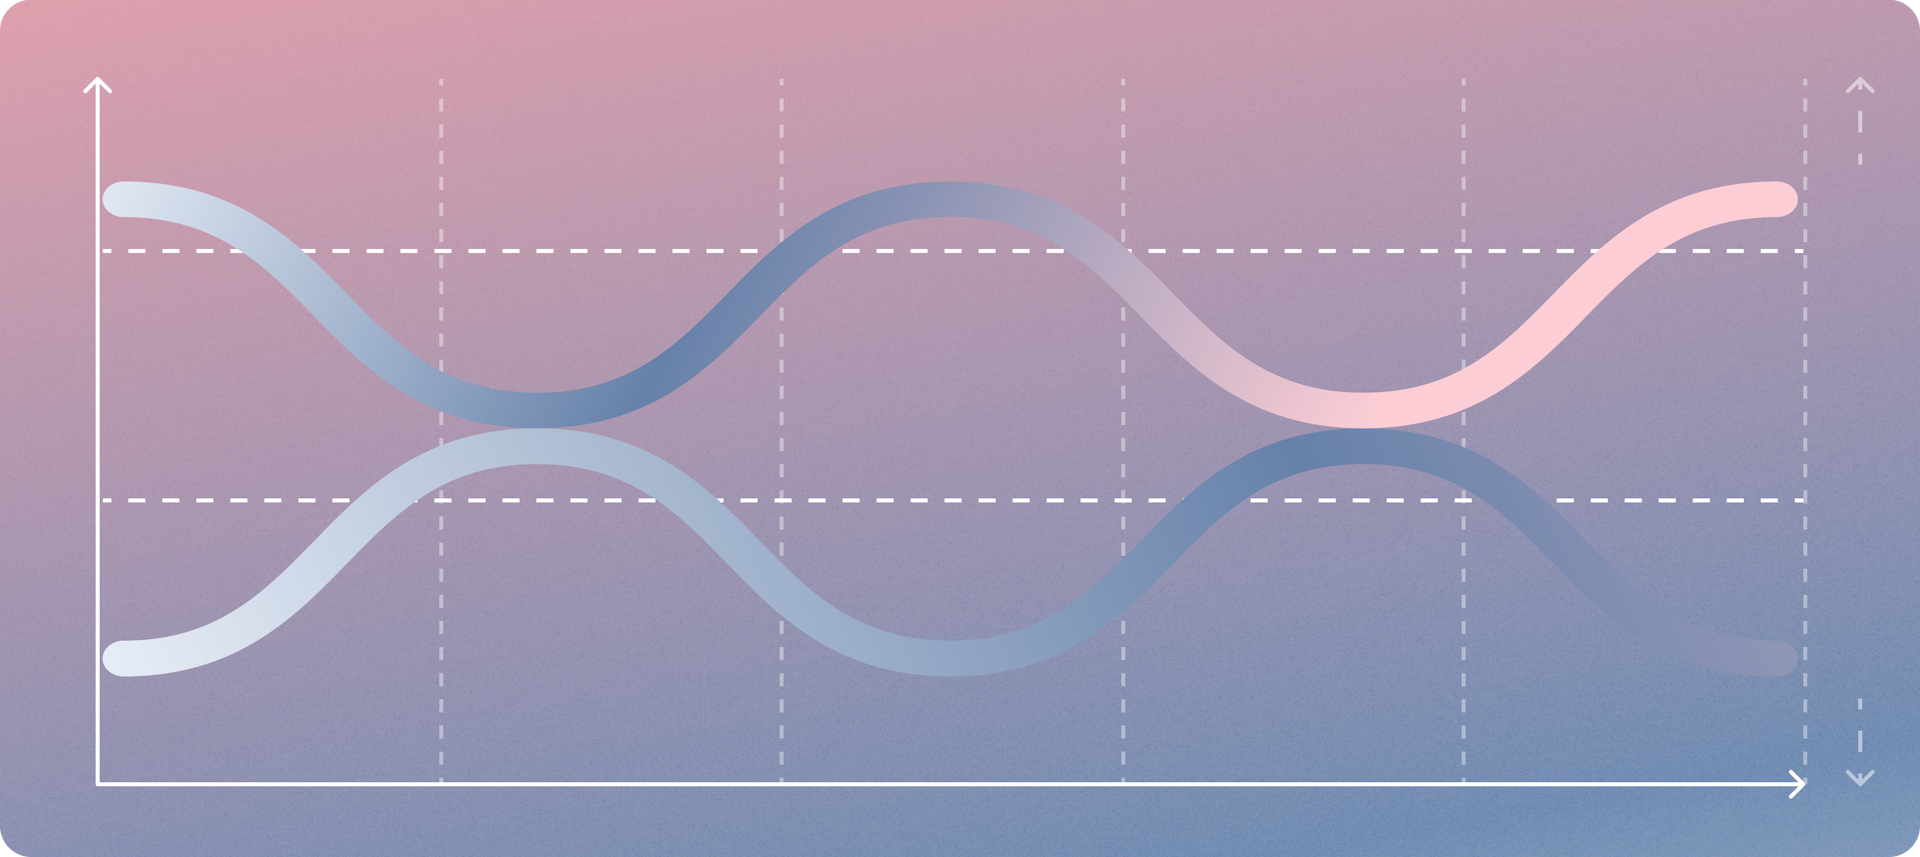 Graphic illustration of wavy lines against a linear backdrop, showing abstract ebb and flow of a chart | Leading and lagging indicators | Mercury